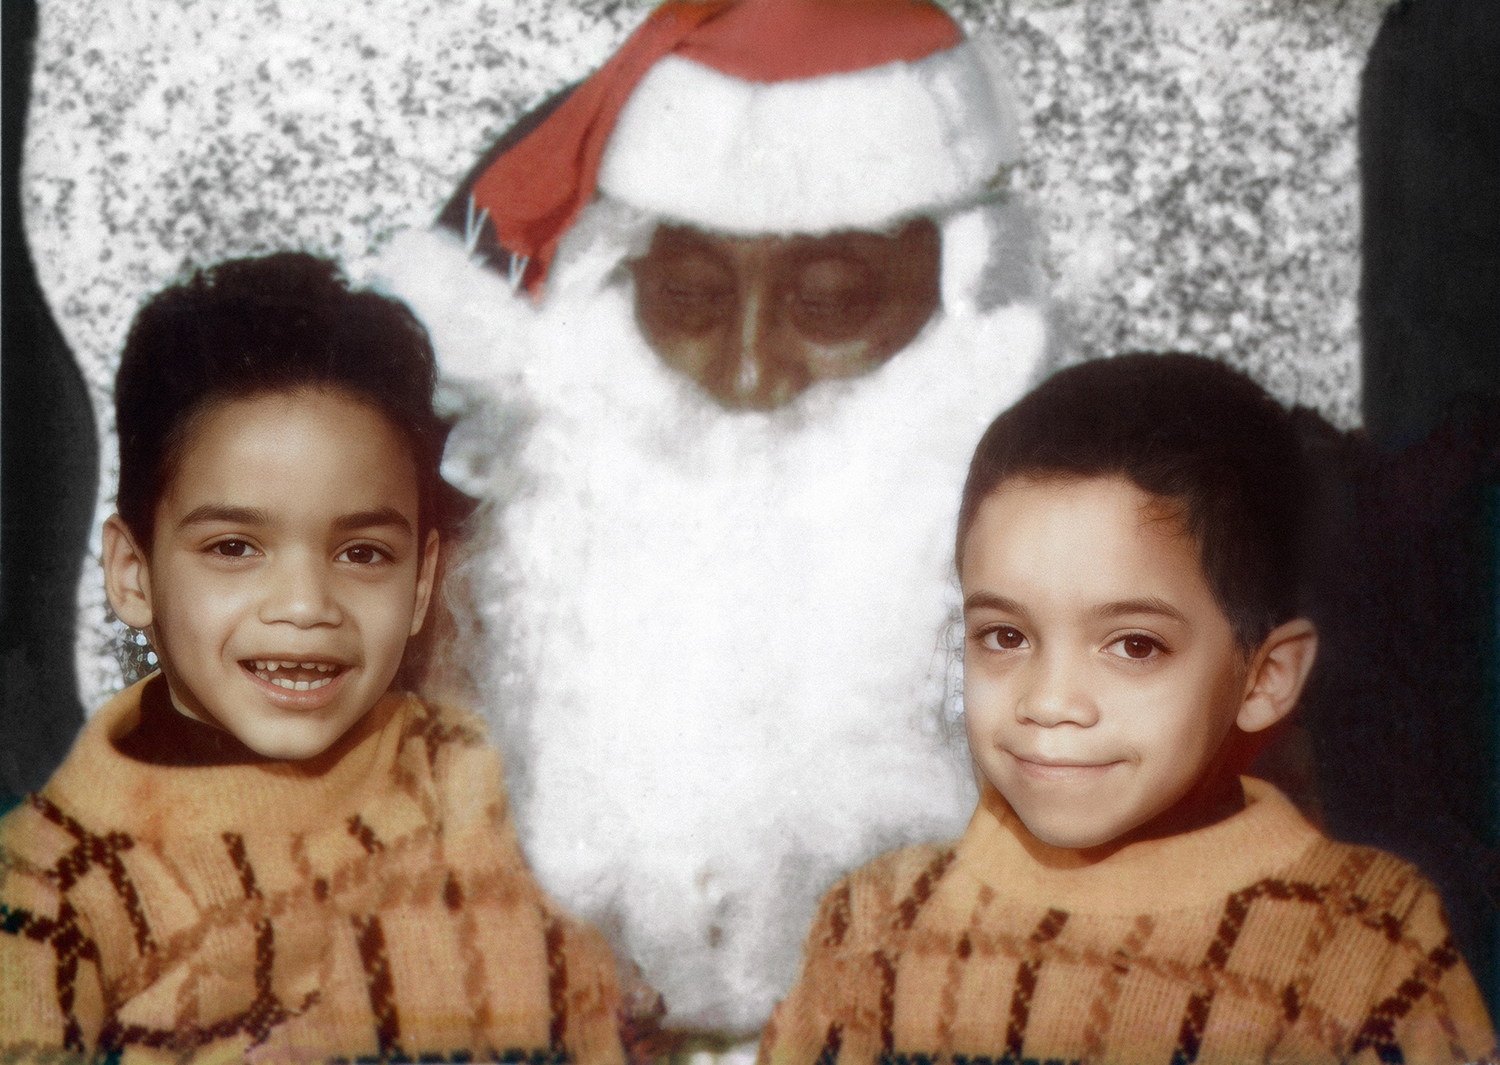 John Blake, left, with his younger brother, Pat, sitting with Santa. Courtesy Blake